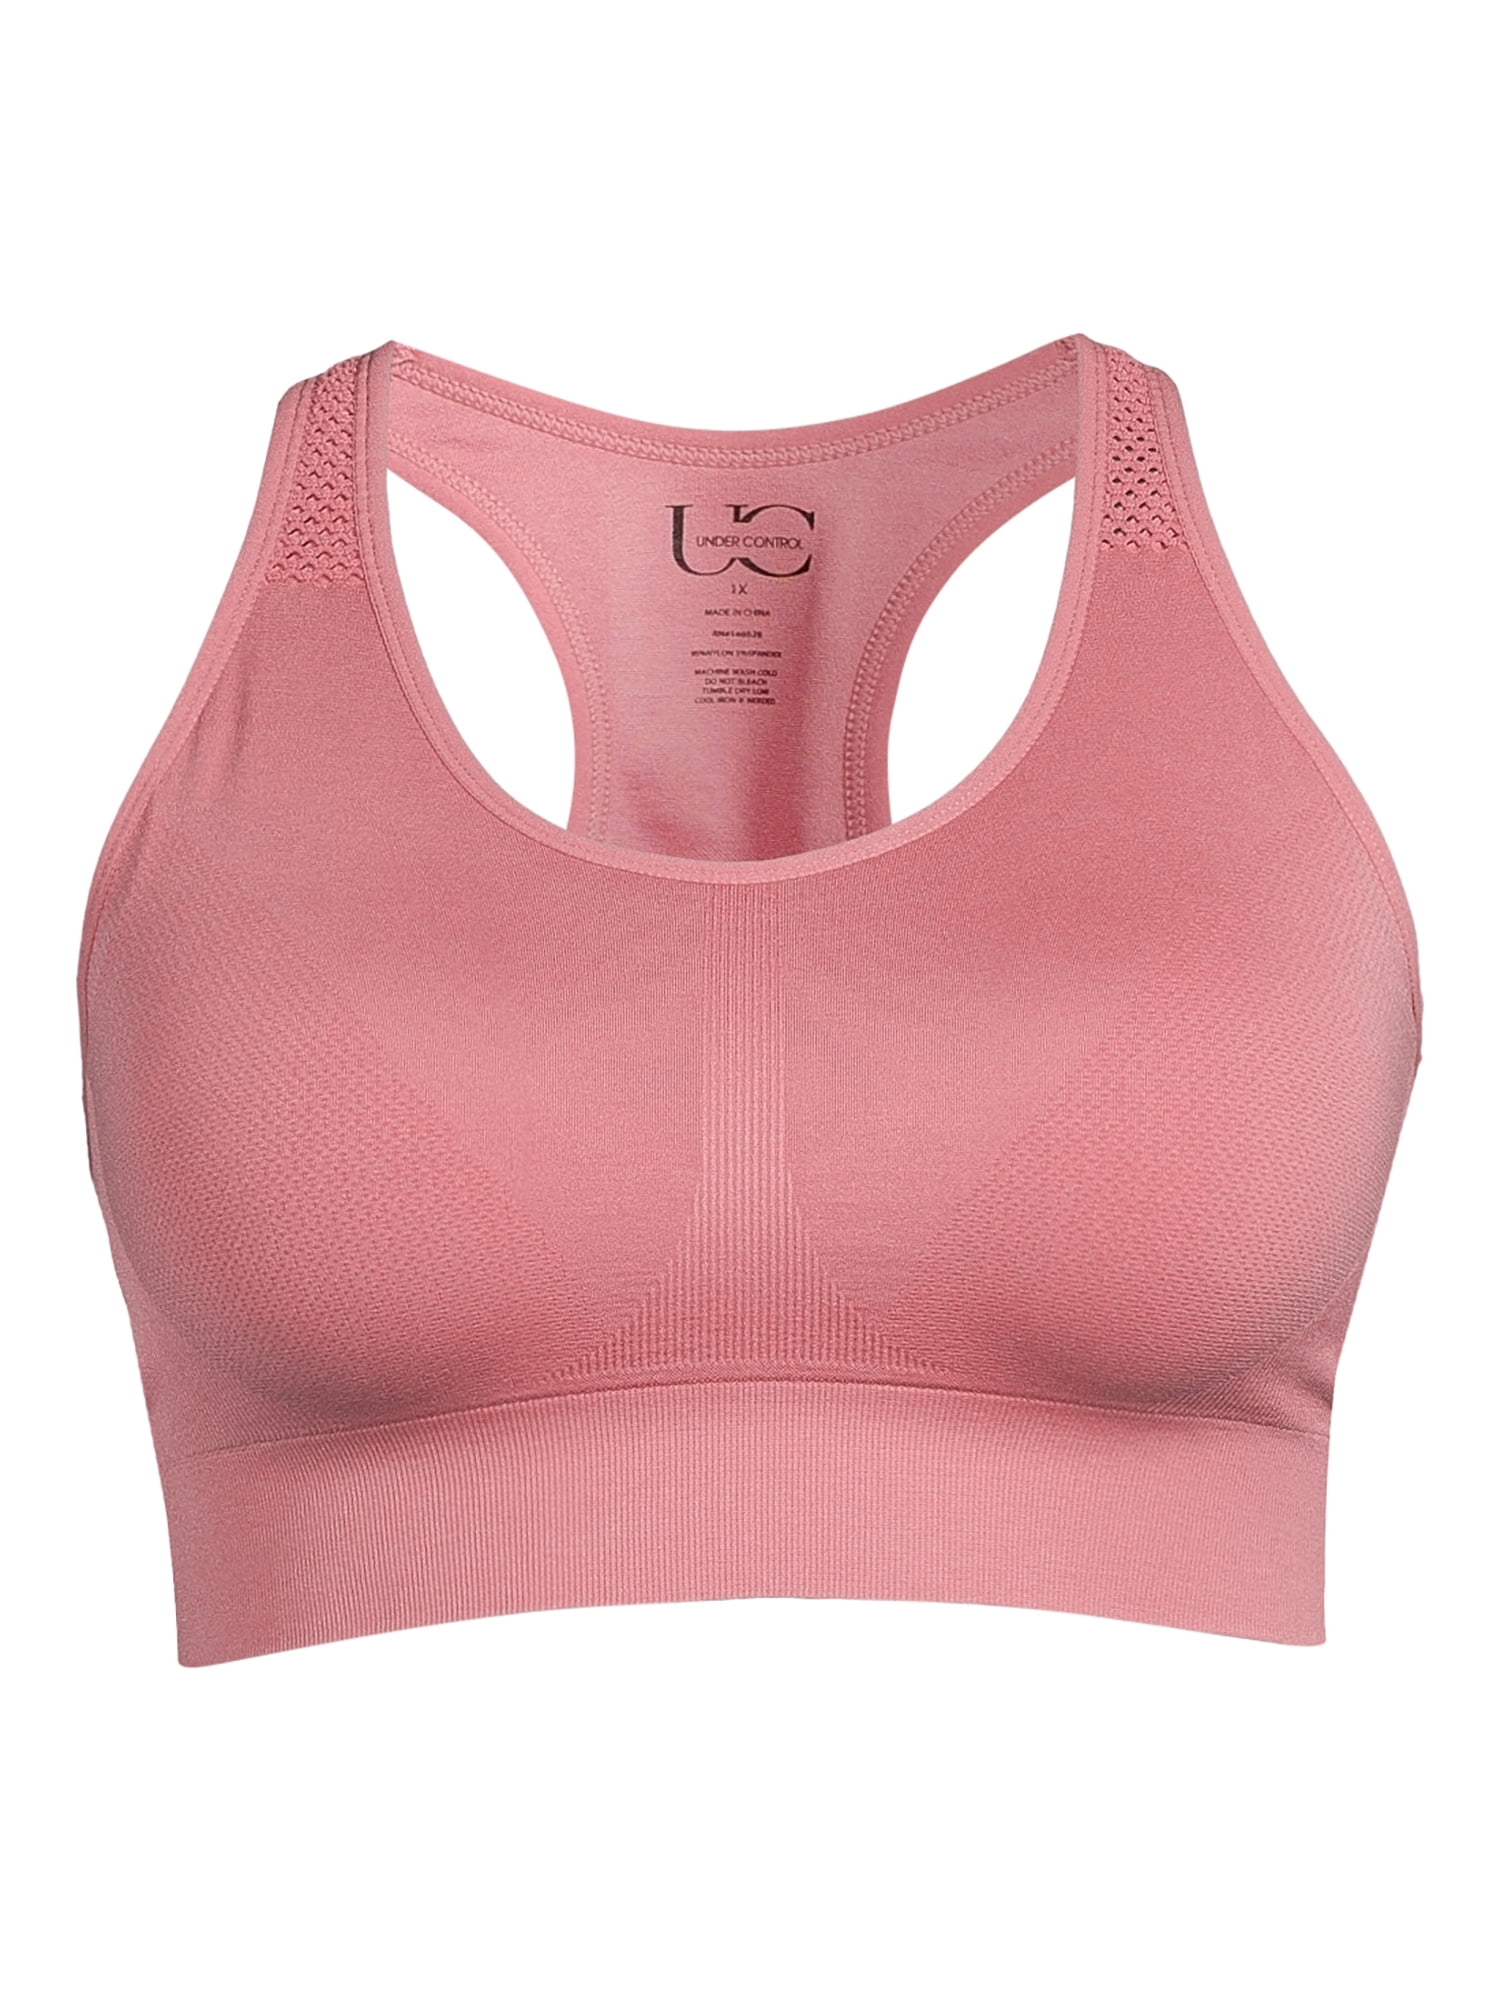 Core 10 Women's Low Impact Sports Bra (Available in Plus Size)